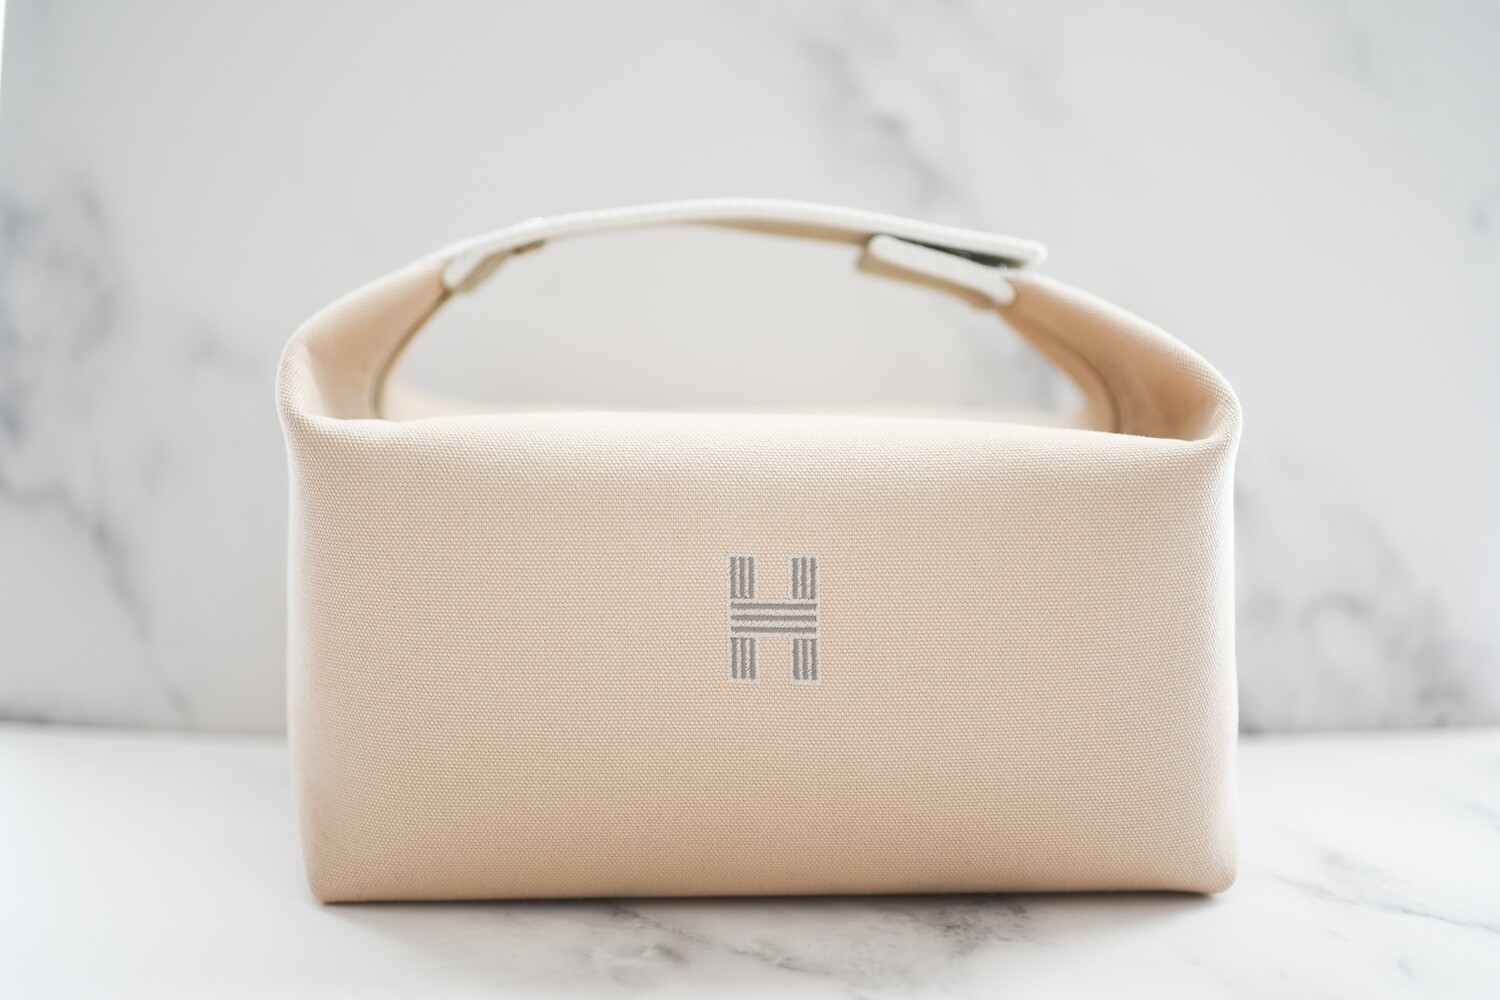 Hermes Bride A Brac Large, Beige and Taupe Canvas, New No Dustbag